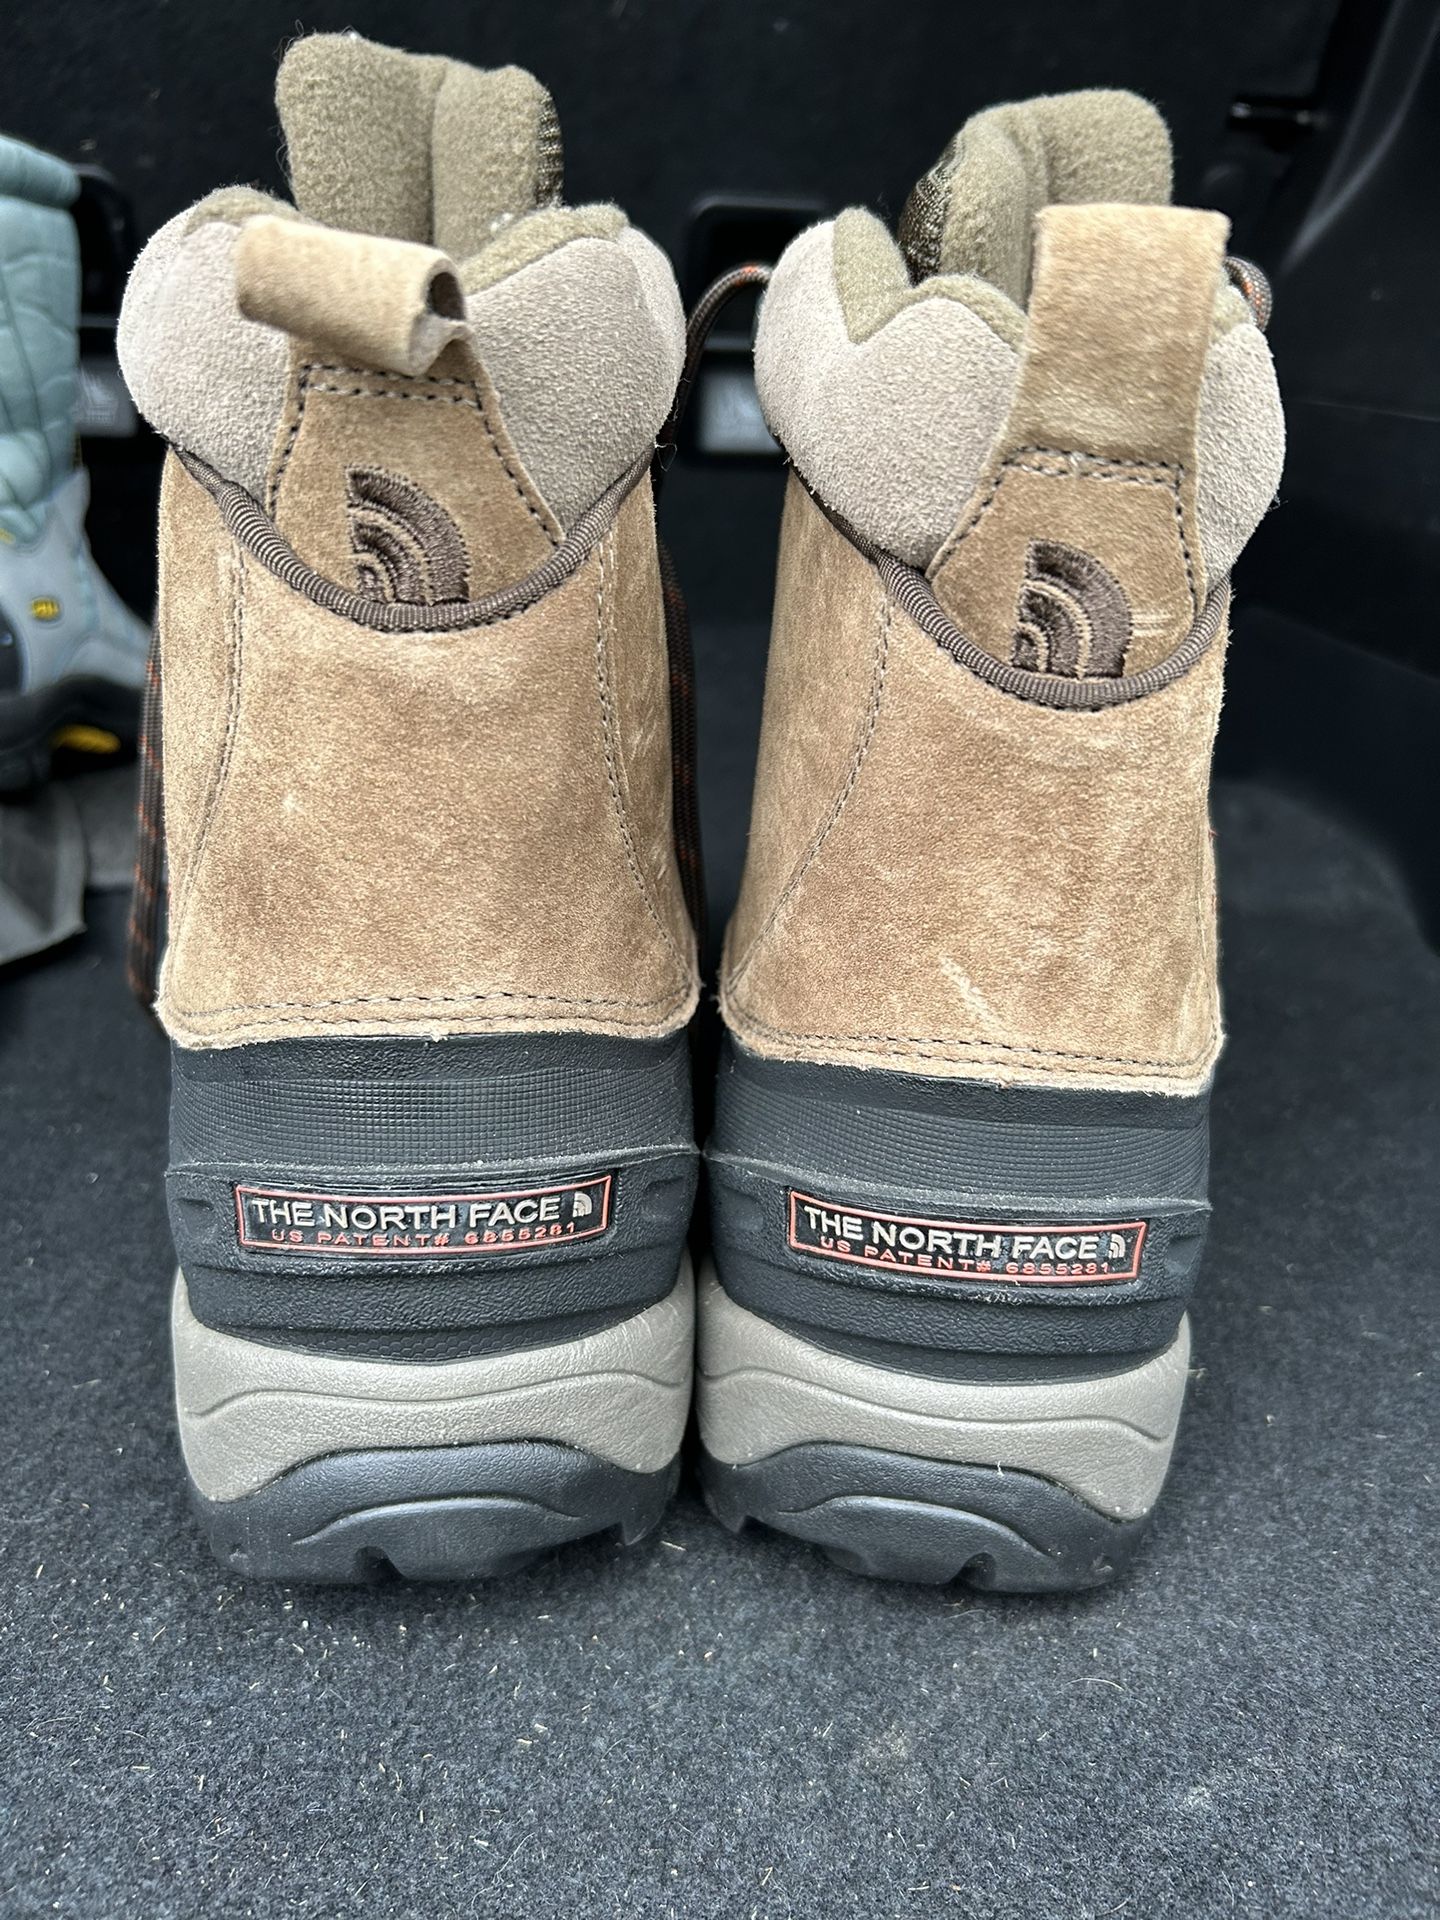 The north face Men’s Snow boots